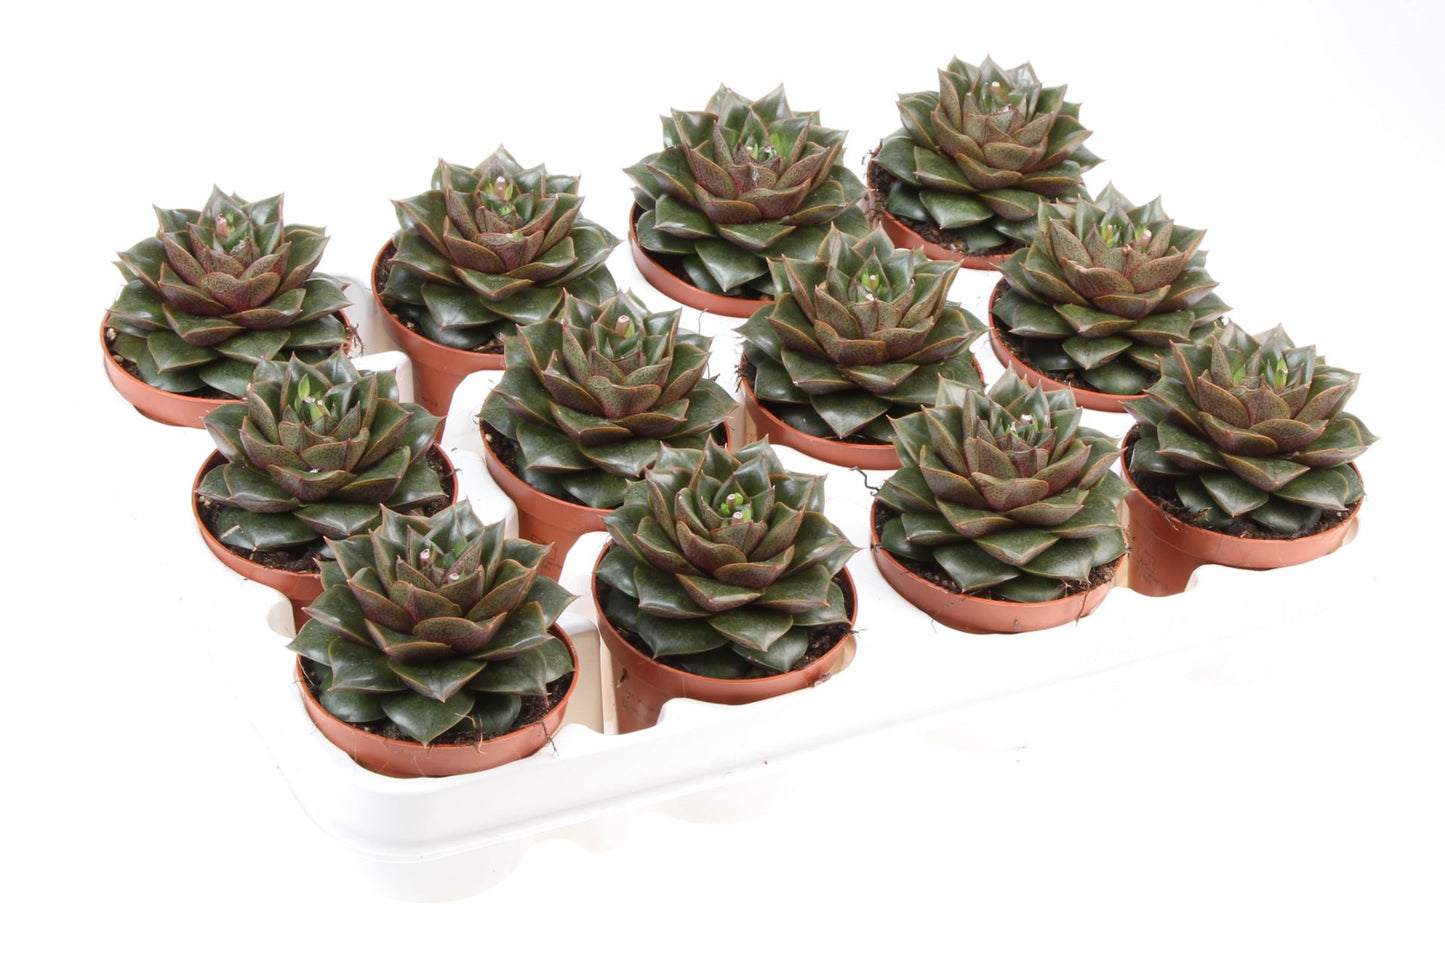 Echeveria Purpusorum succulent featuring a rosette of dark green leaves with reddish-brown spots, placed in a stylish white pot.